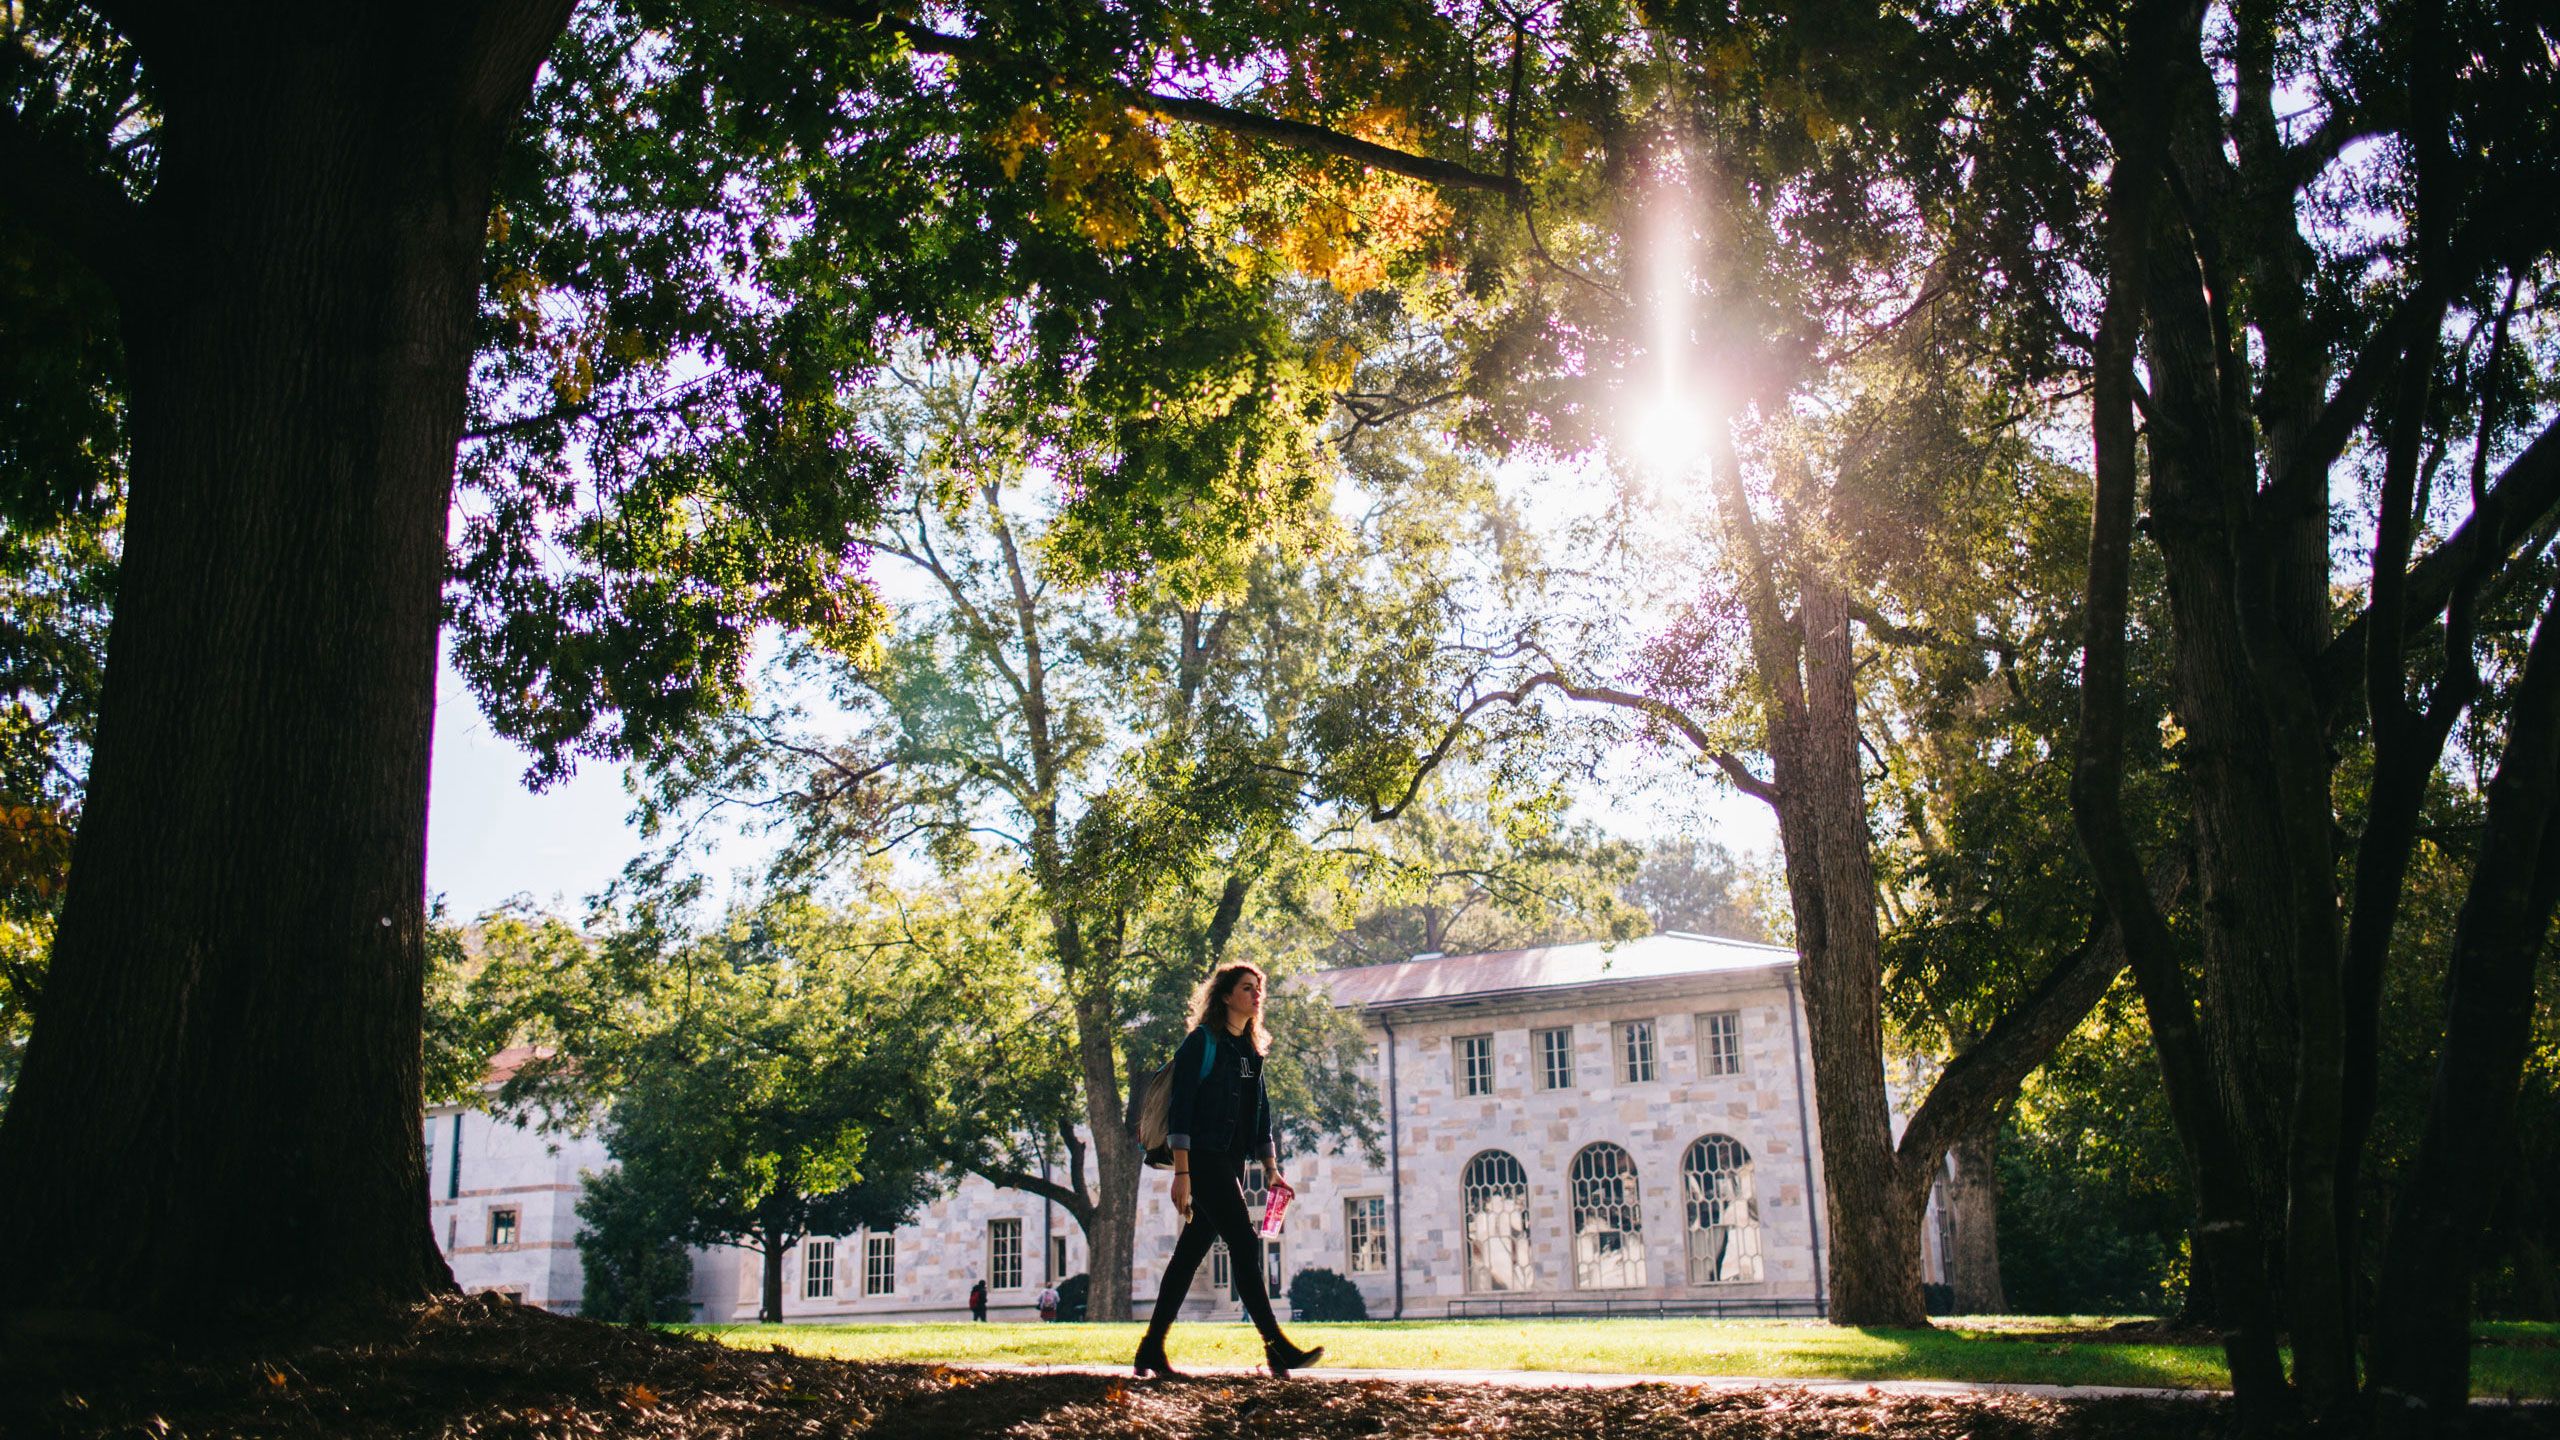 A student walks across the Emory Quad as sunlight streams through the trees.